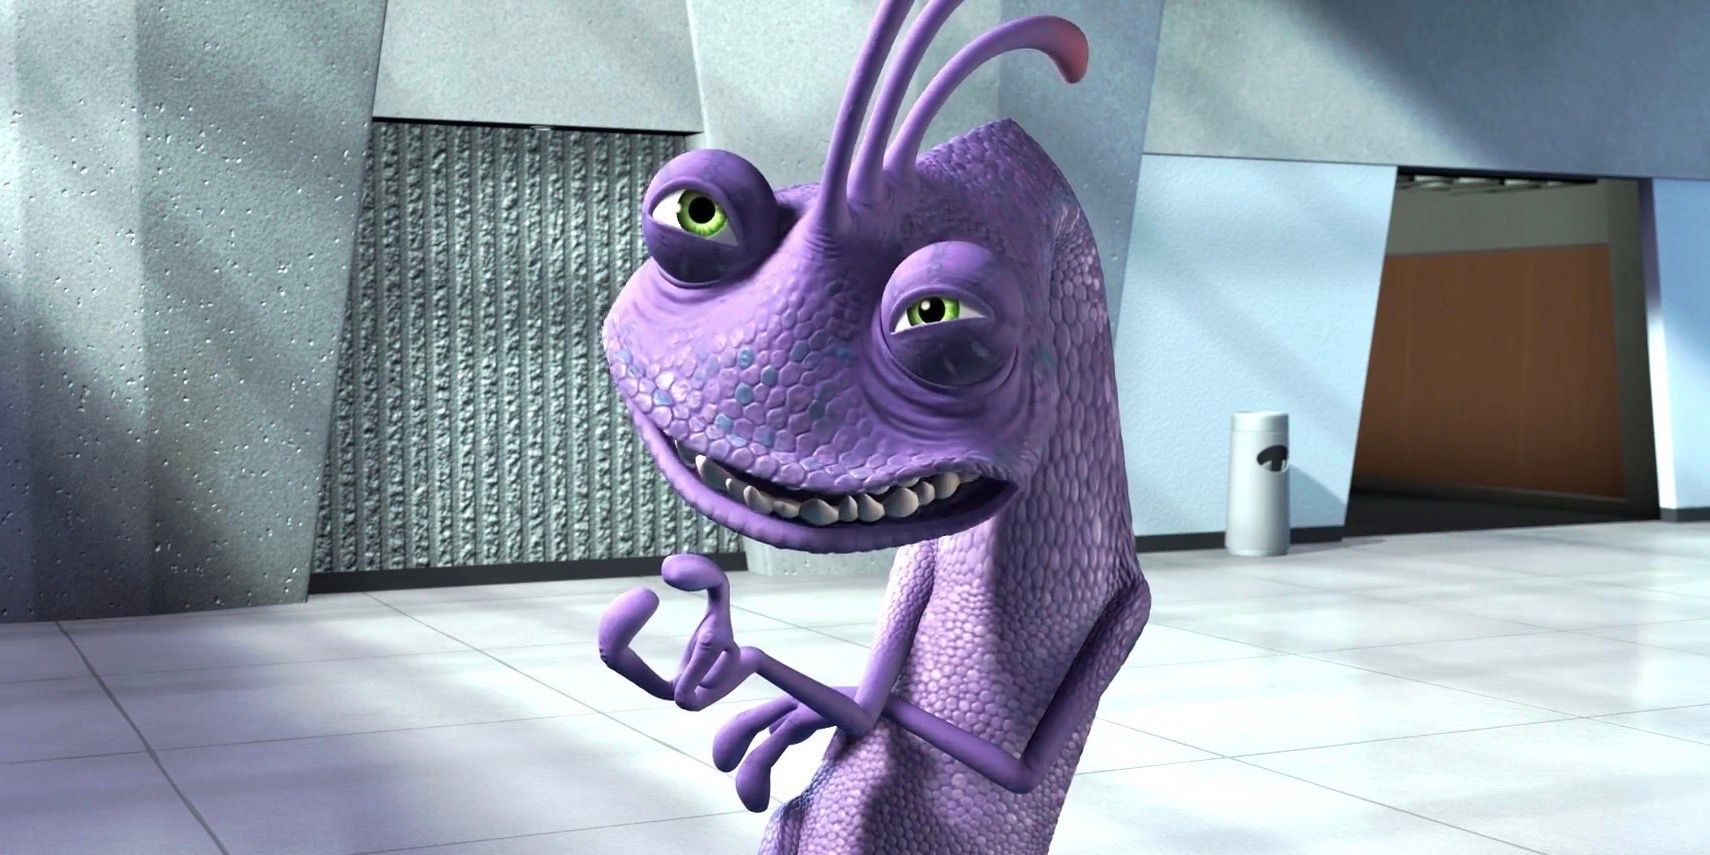 Randall in the office in Monsters Inc